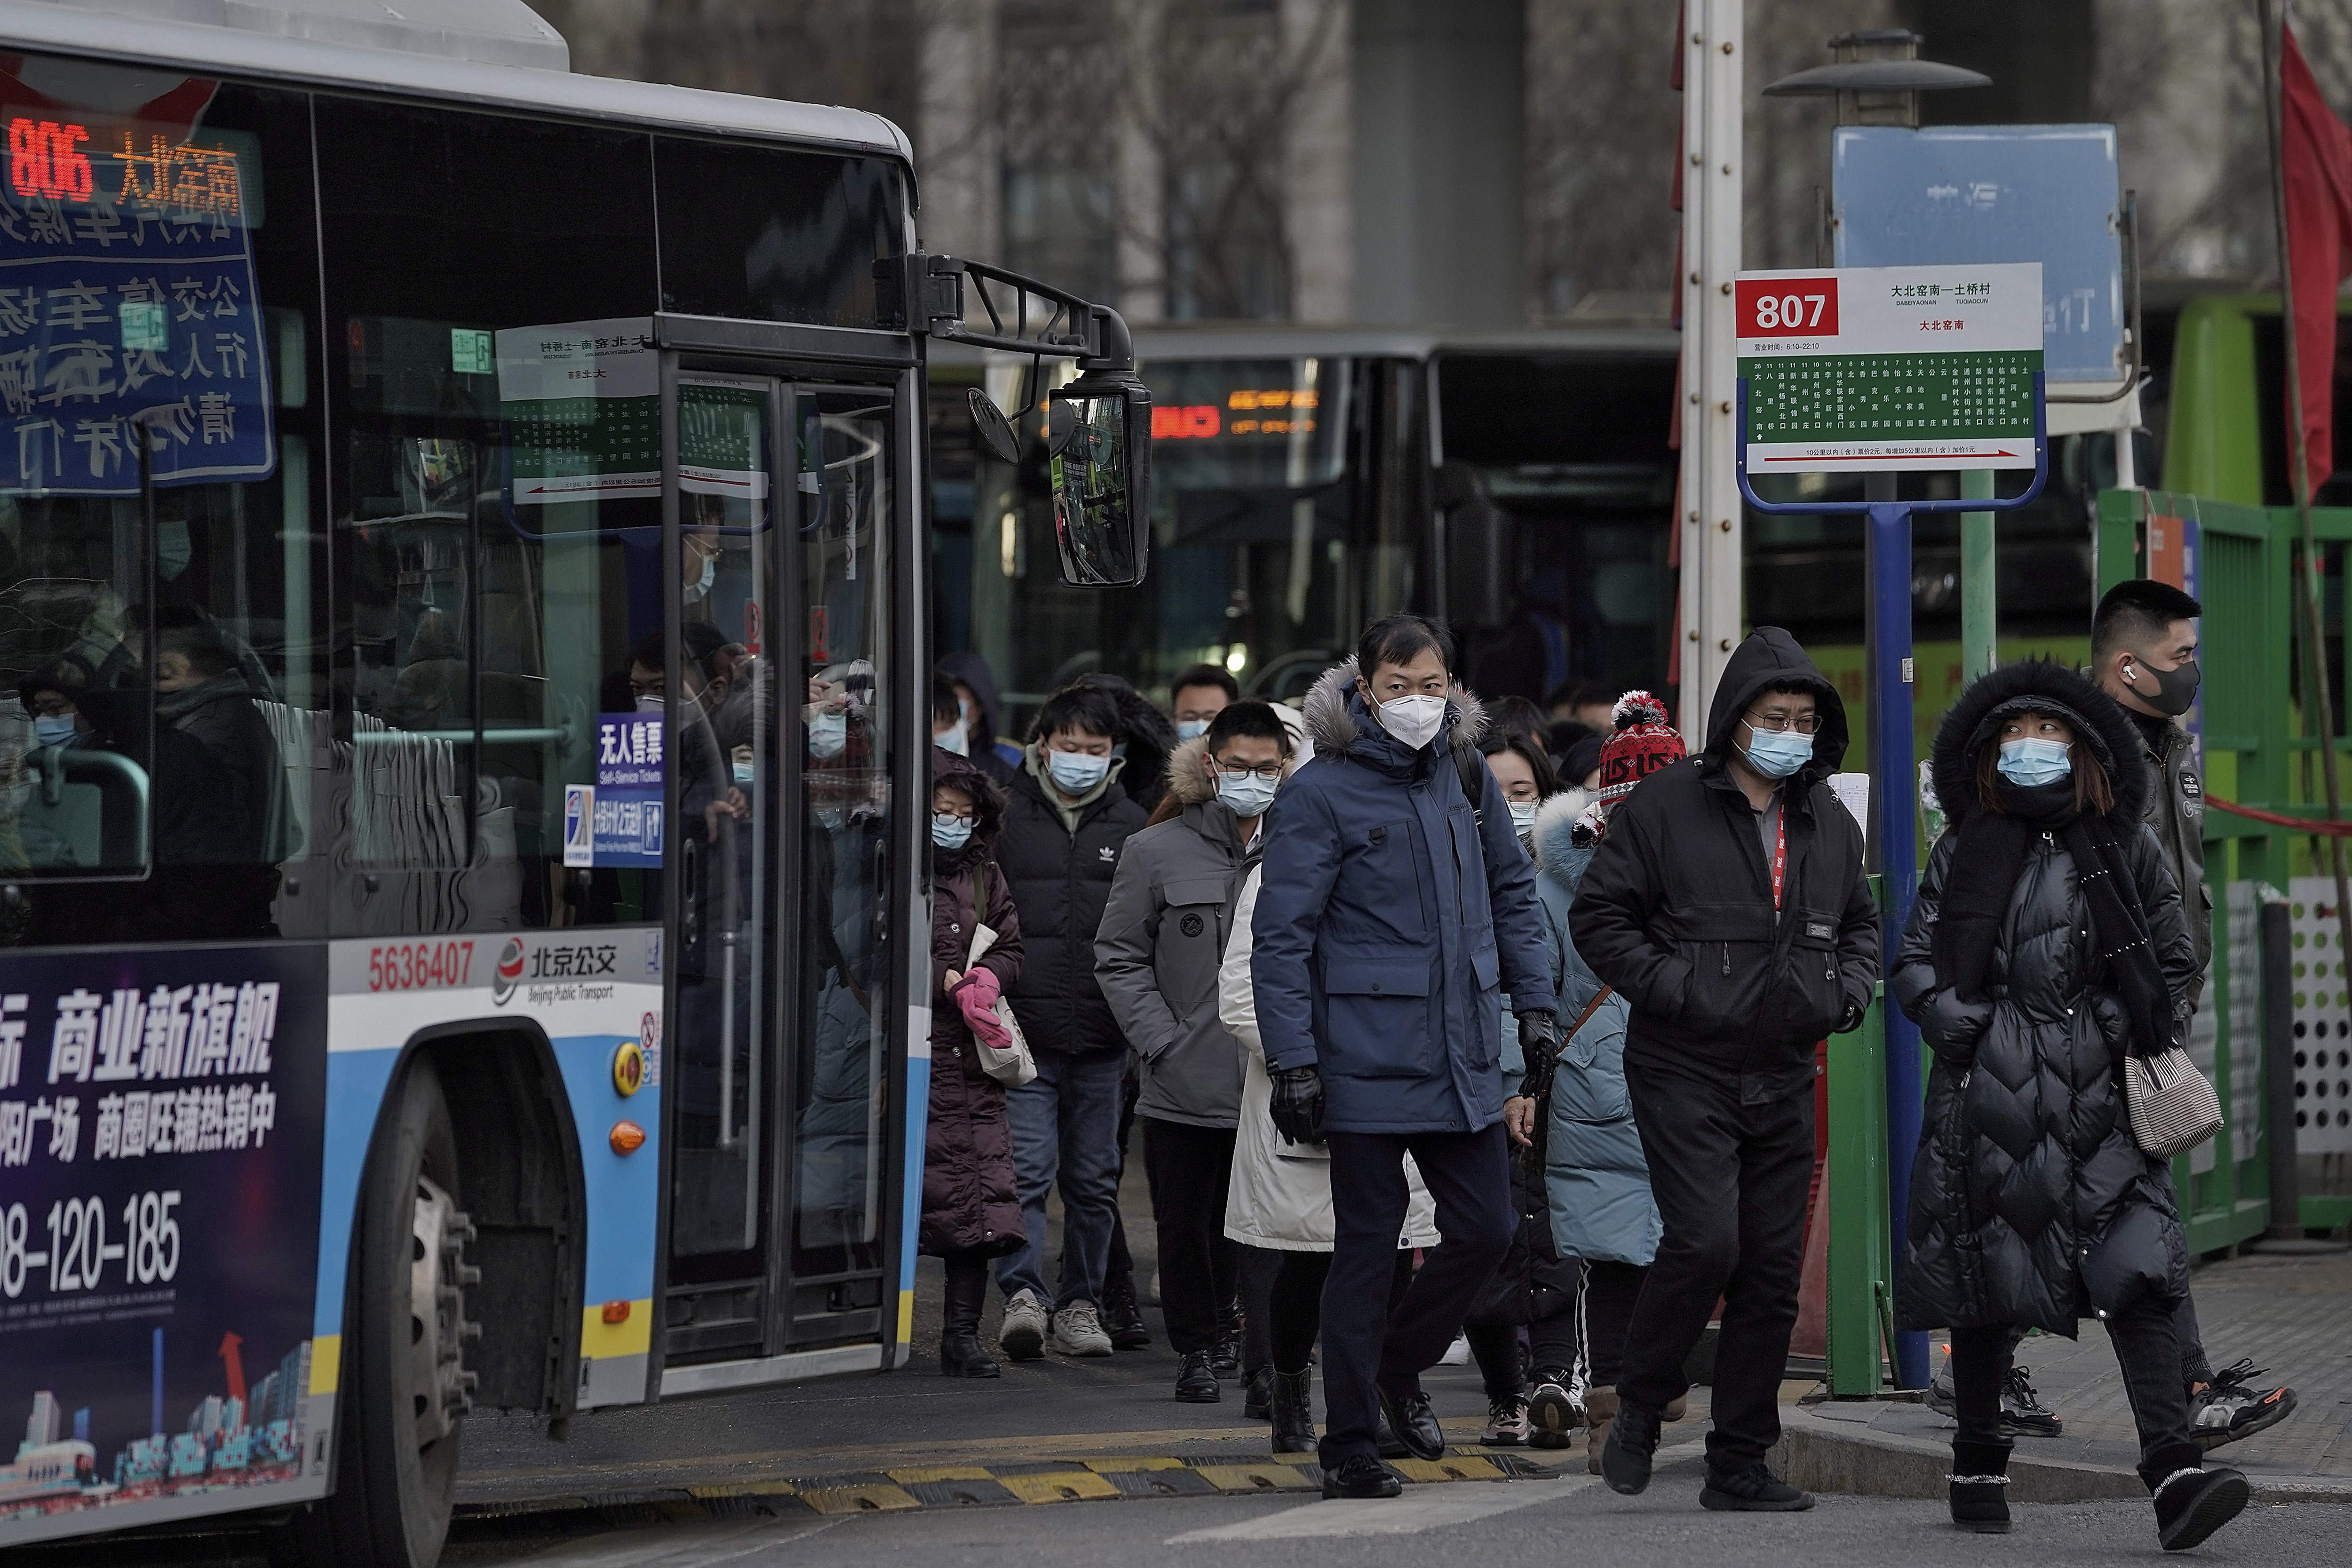 People wearing face masks to help curb the spread of the coronavirus walk out from a bus station for the traveller from the outskirts of Beijing on Monday, Jan. 11, 2012. Chinese health authorities say scores more people have tested positive for coronavirus in Hebei province bordering on the capital Beijing. The outbreak focused on the Hebei cities of Shijiazhuang and Xingtai is one of China's most serious in recent months and comes amid measures to curb the further spread during next month's Lunar New Year holiday. (AP Photo/Andy Wong)